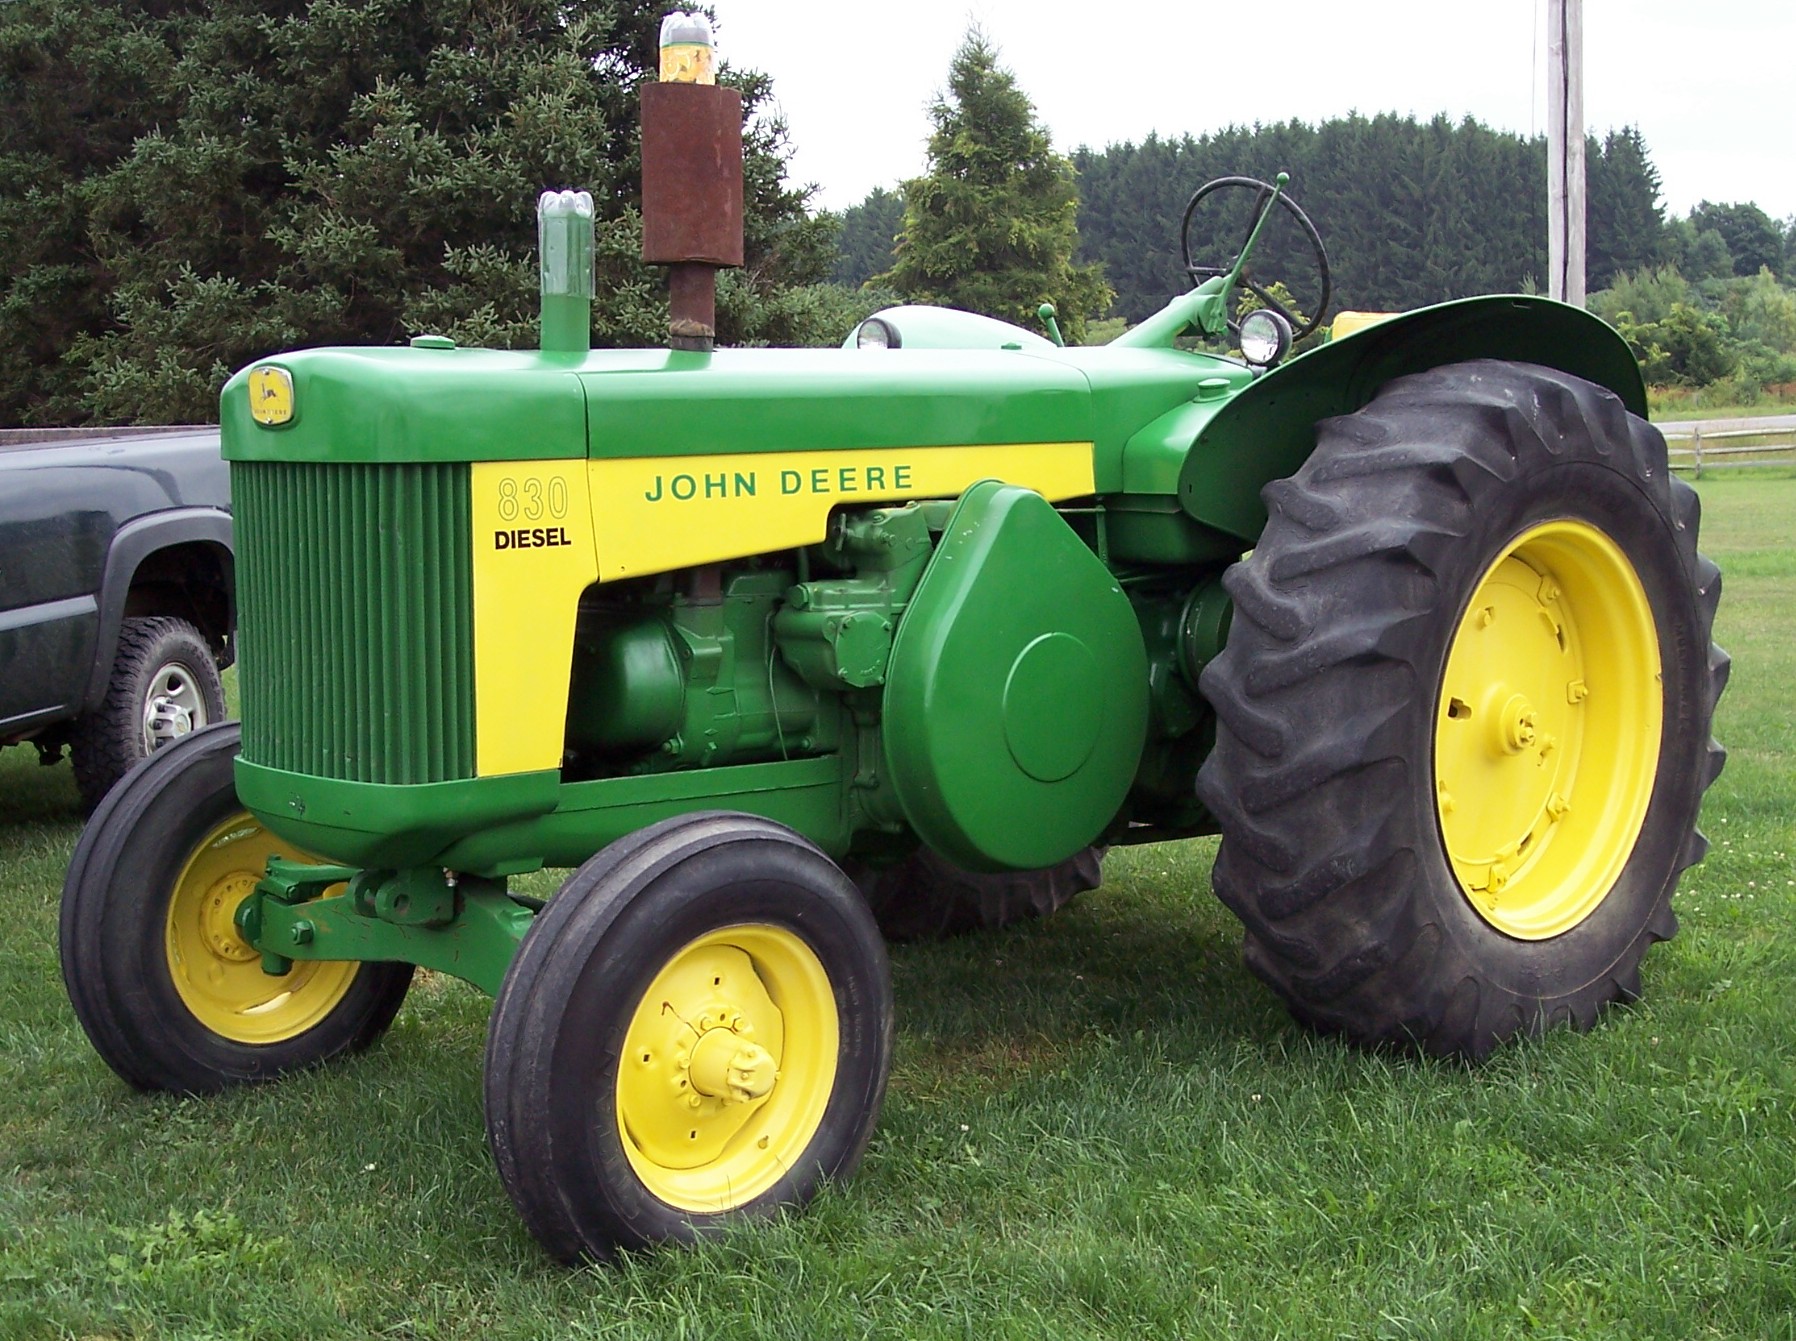 john deere 830 - group picture, image by tag - keywordpictures.com